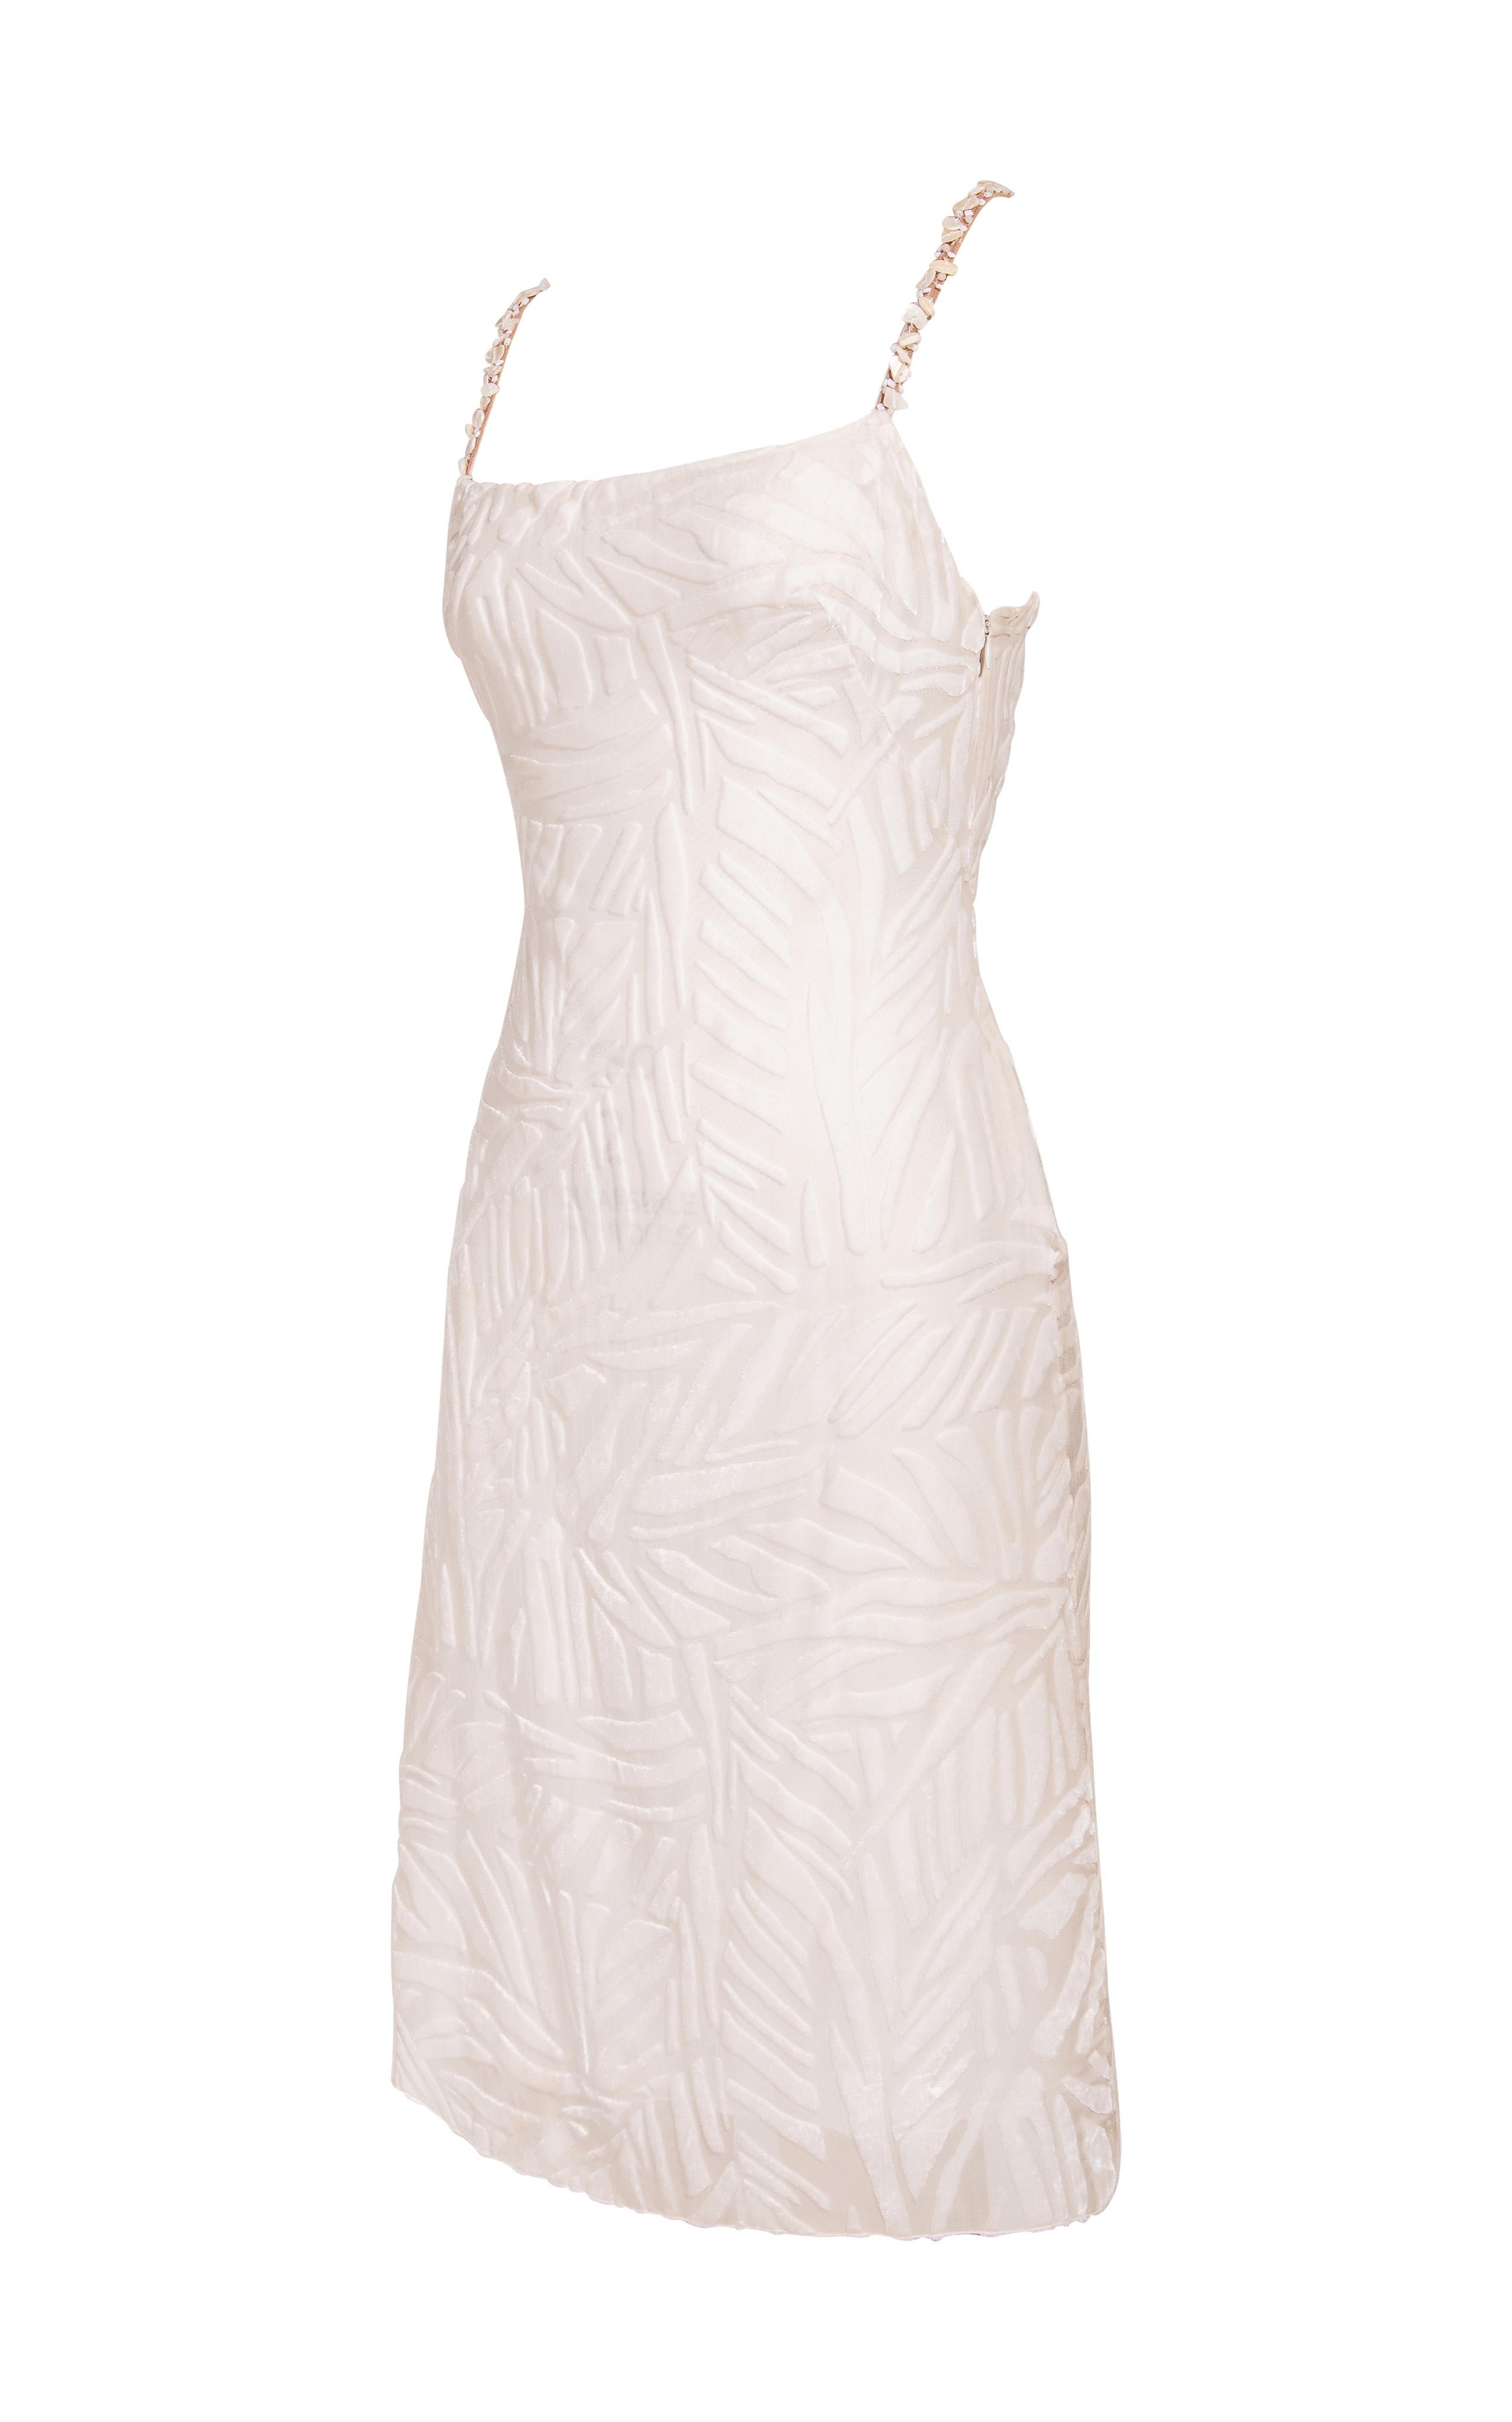 A/W 1999 Gianni Versace white silk velvet burnout mini dress with shell and beaded embellished straps. Sleeveless dress with velvet leaf print throughout. Fitted bodice with slightly flared hem.